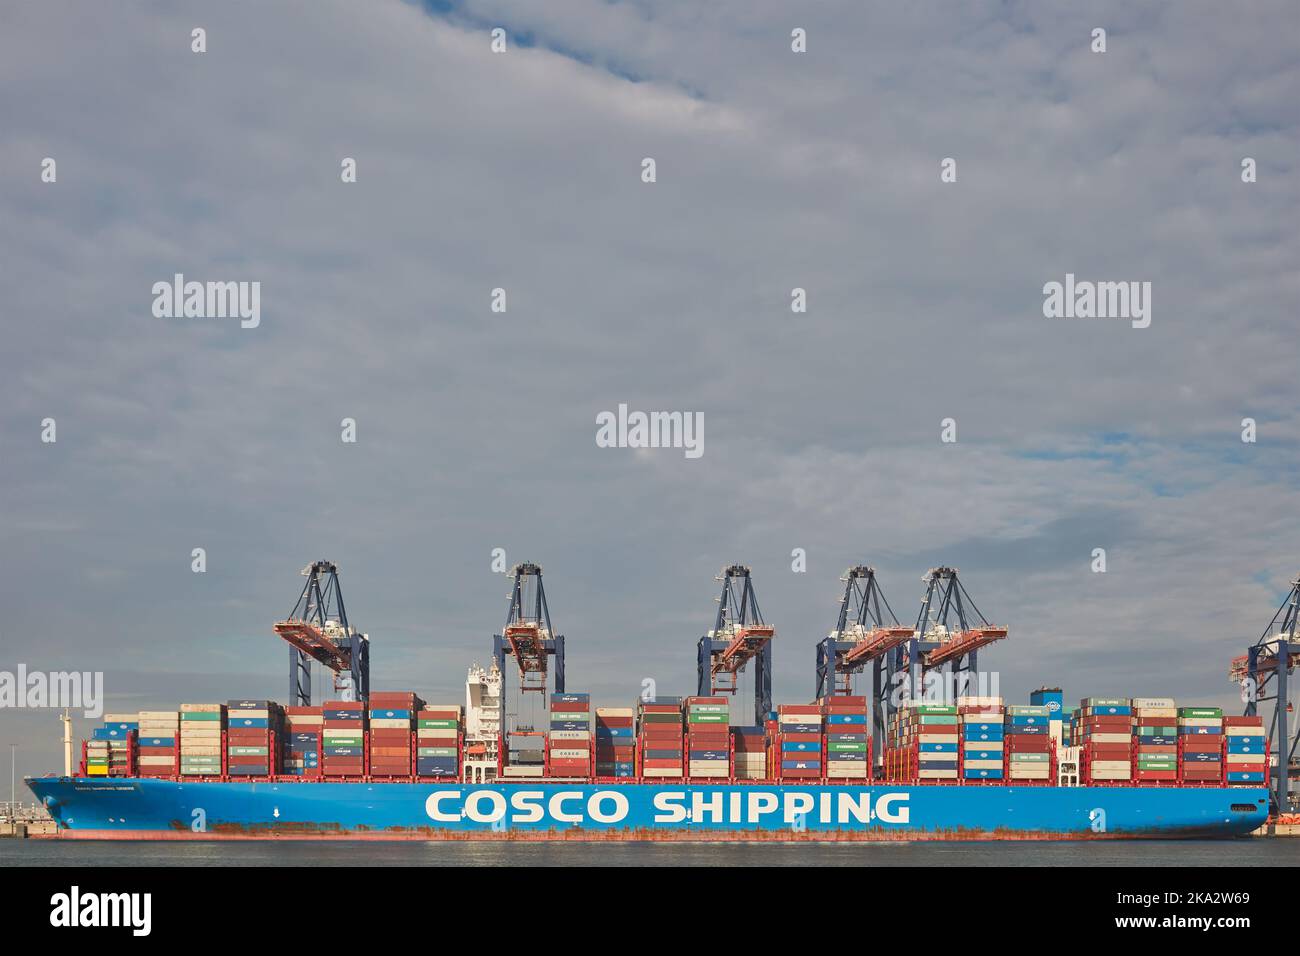 Rotterdam, The Netherlands - October 12, 2022: Large cargo container ship from the Chinese Cosco Shipping company docked on the Dutch Maasvlakte Stock Photo